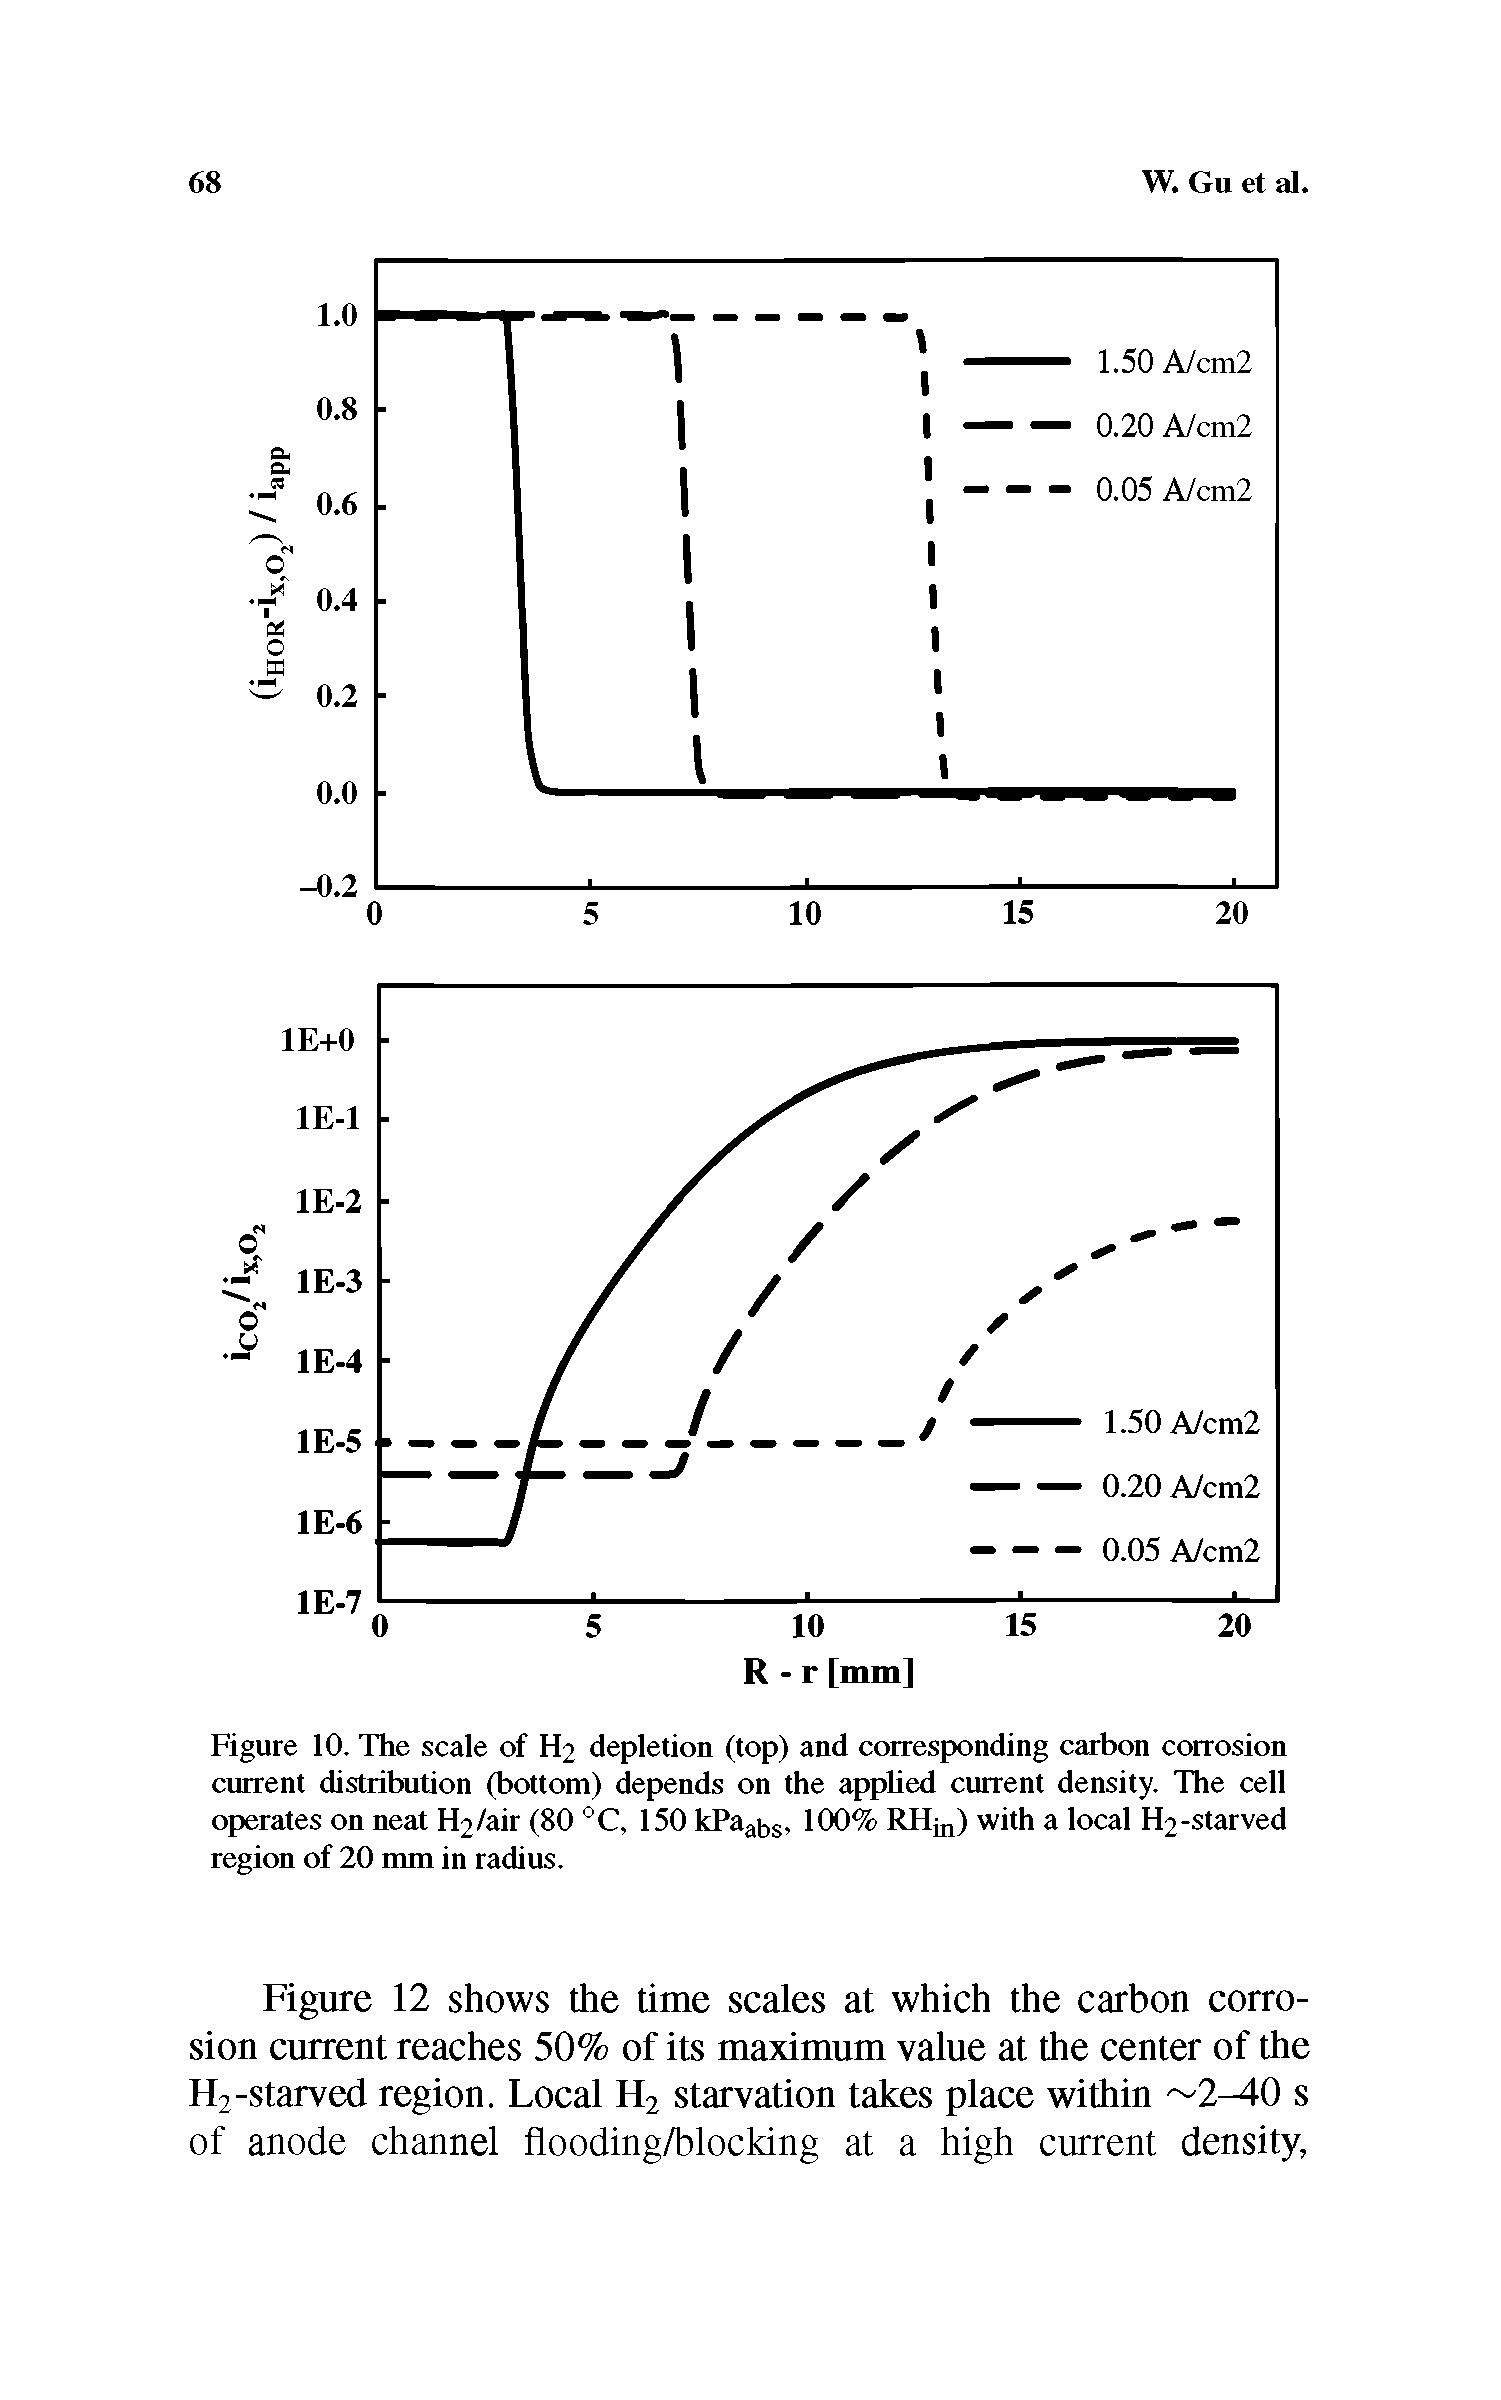 Figure 10. The scale of H2 depletion (top) and corresponding carbon corrosion current distribution (bottom) depends on the apphed current density. The cell operates on neat H2/air (80 °C, 150 kPaa ,s, 100% RIIjn) with a local -starved region of 20 mm in radius.